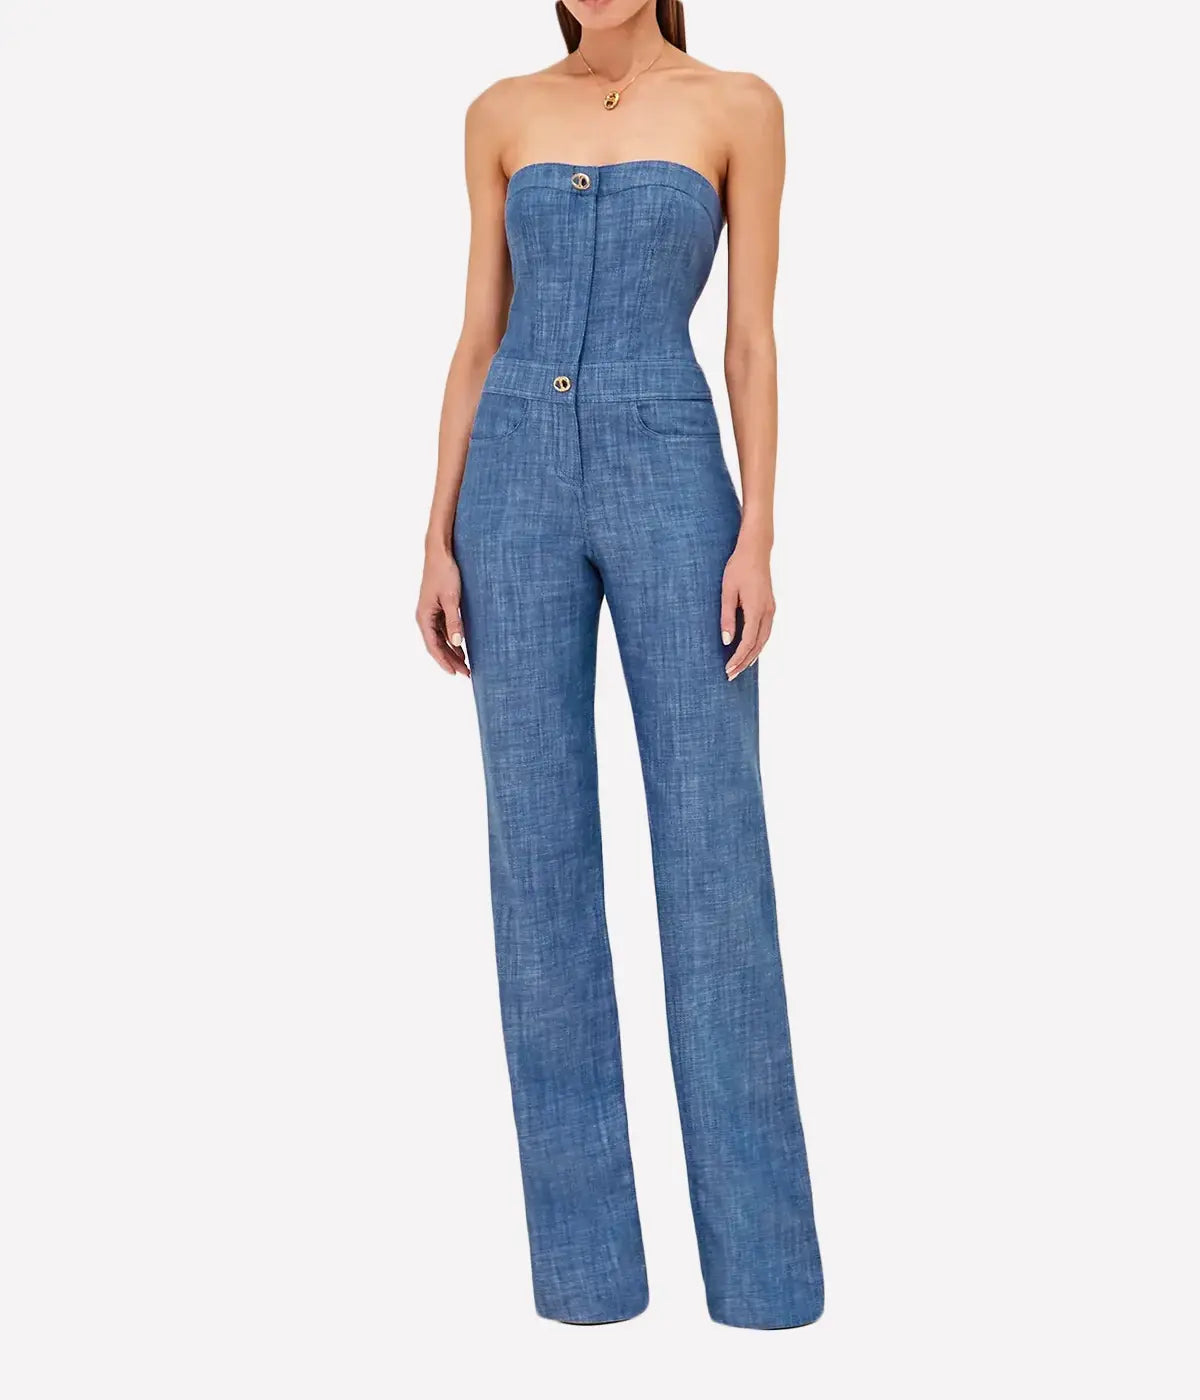 Breslin Jumpsuit in Chambray